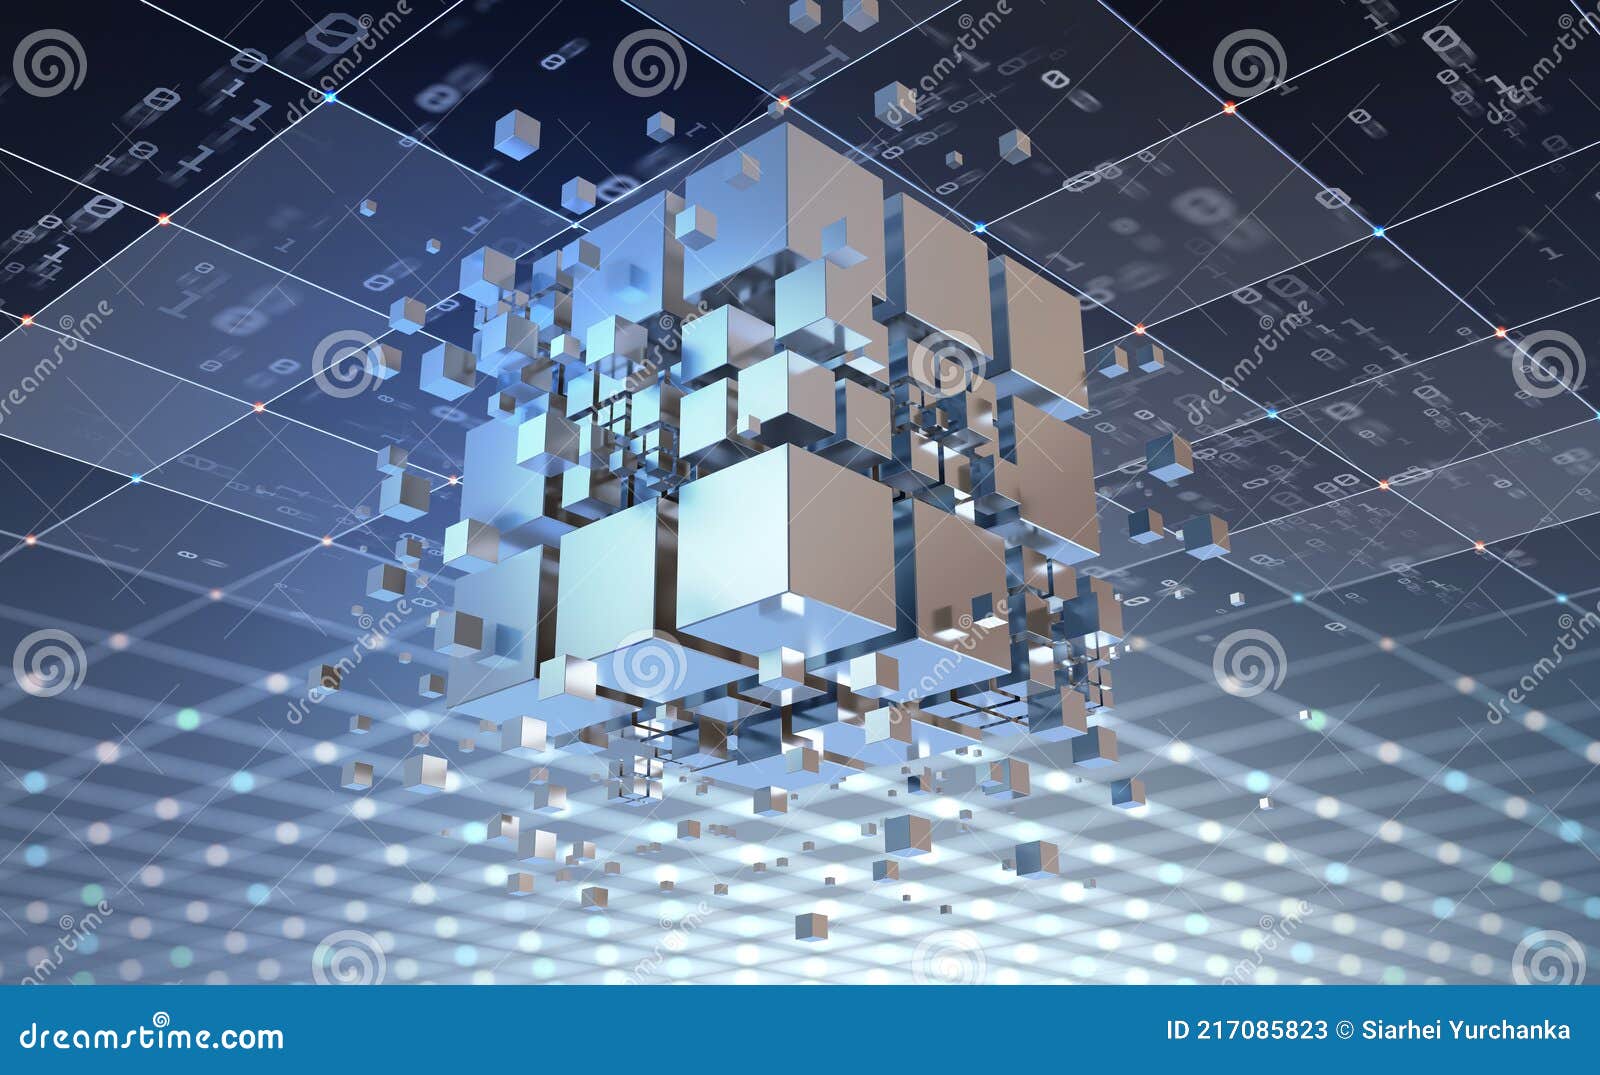 high-tech and data capture. square blocks are collected in a cubic array